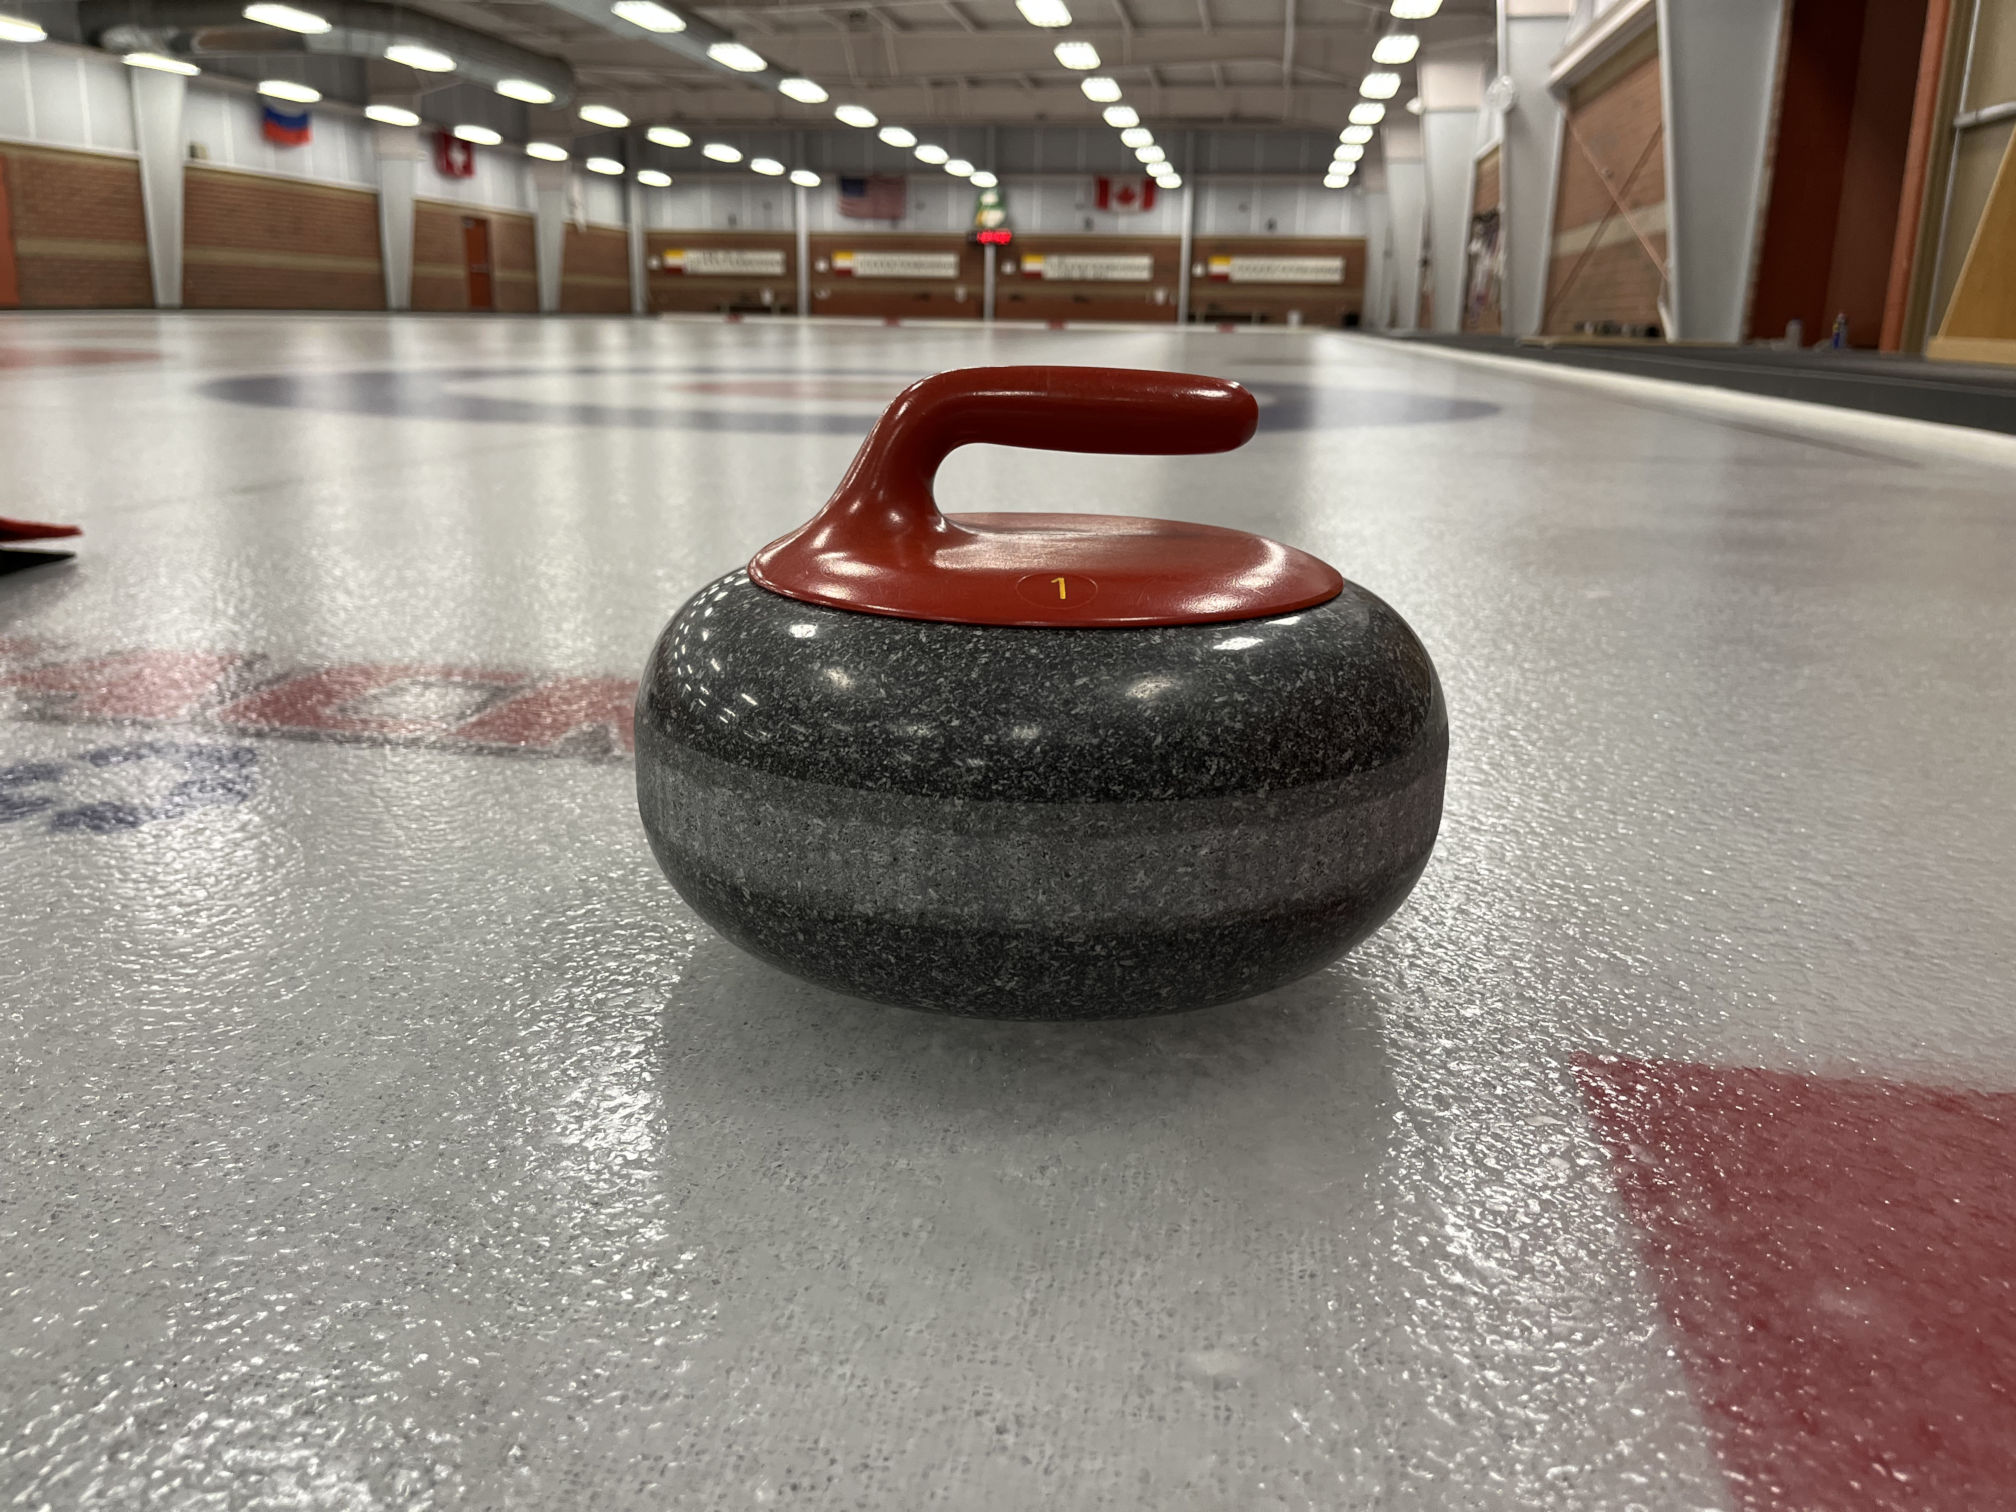 A curling stone